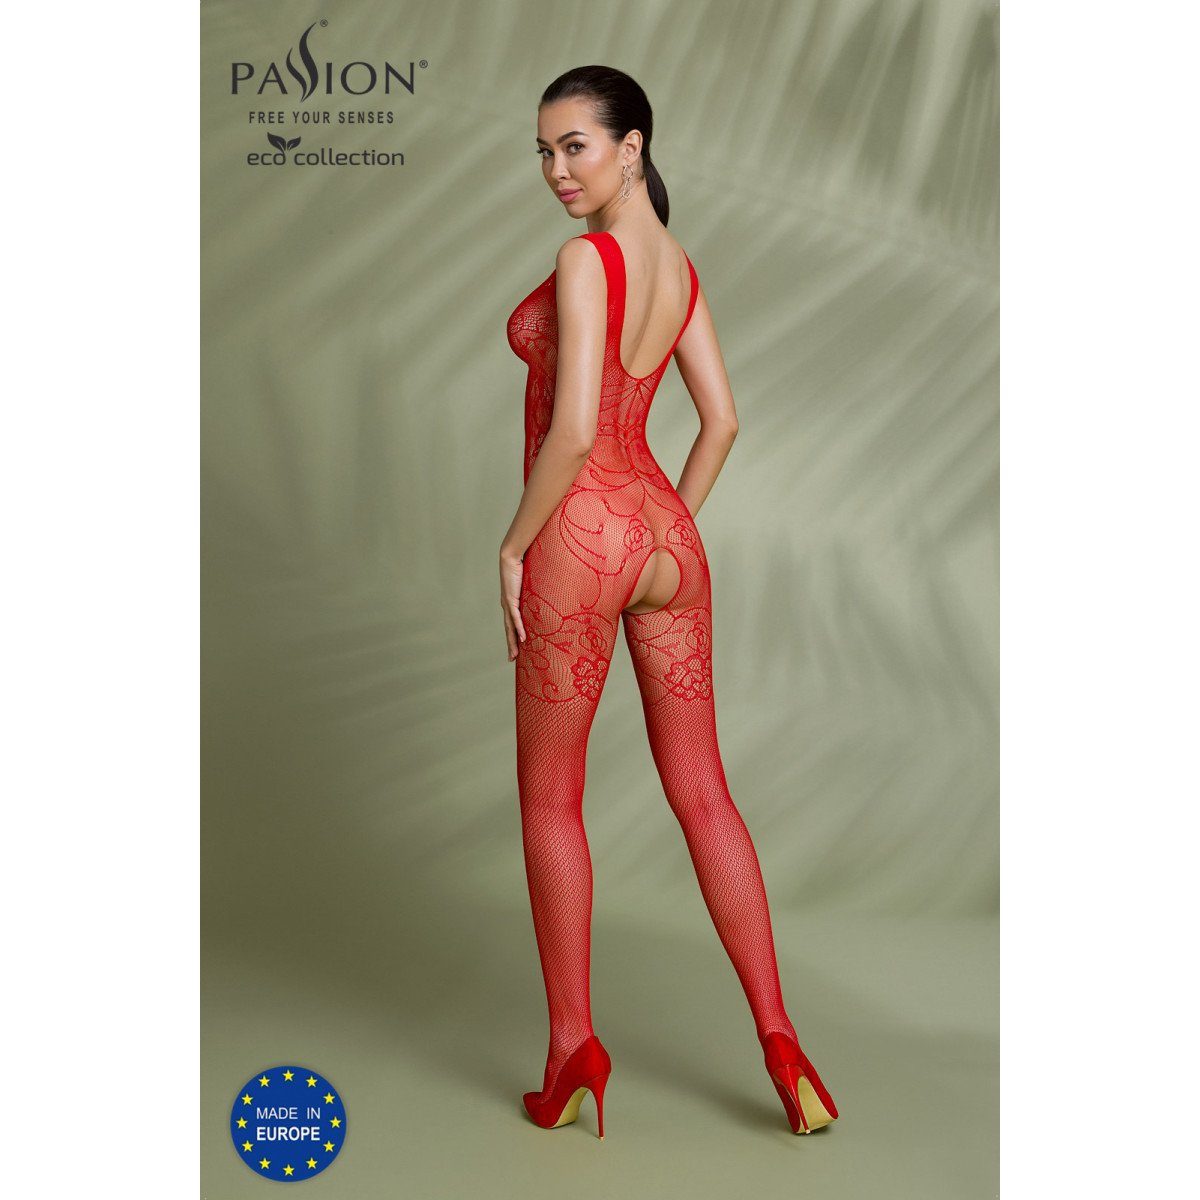 BS012 Catsuit - Passion ECO Bodystocking (S/L) Eco Collection PE red